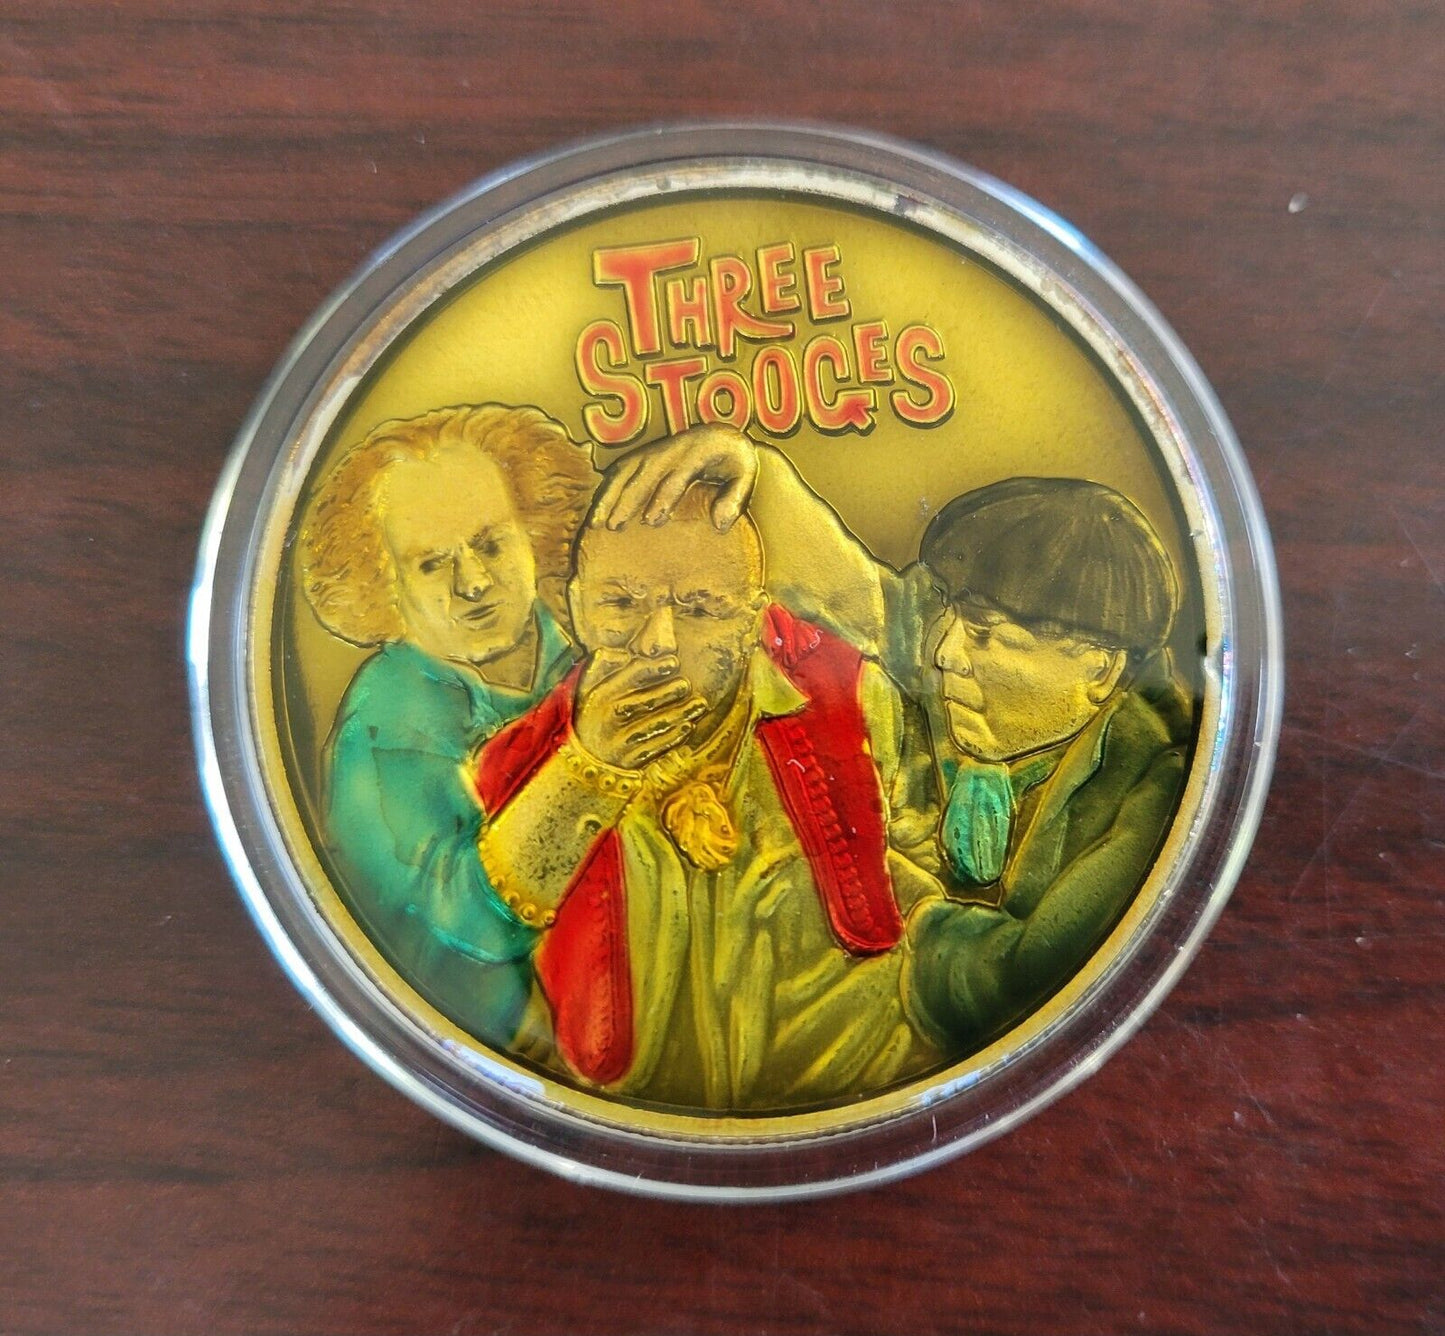 The Three Stooges Enameled Coin 1 Troy oz .999 Fine Silver Round Colorized